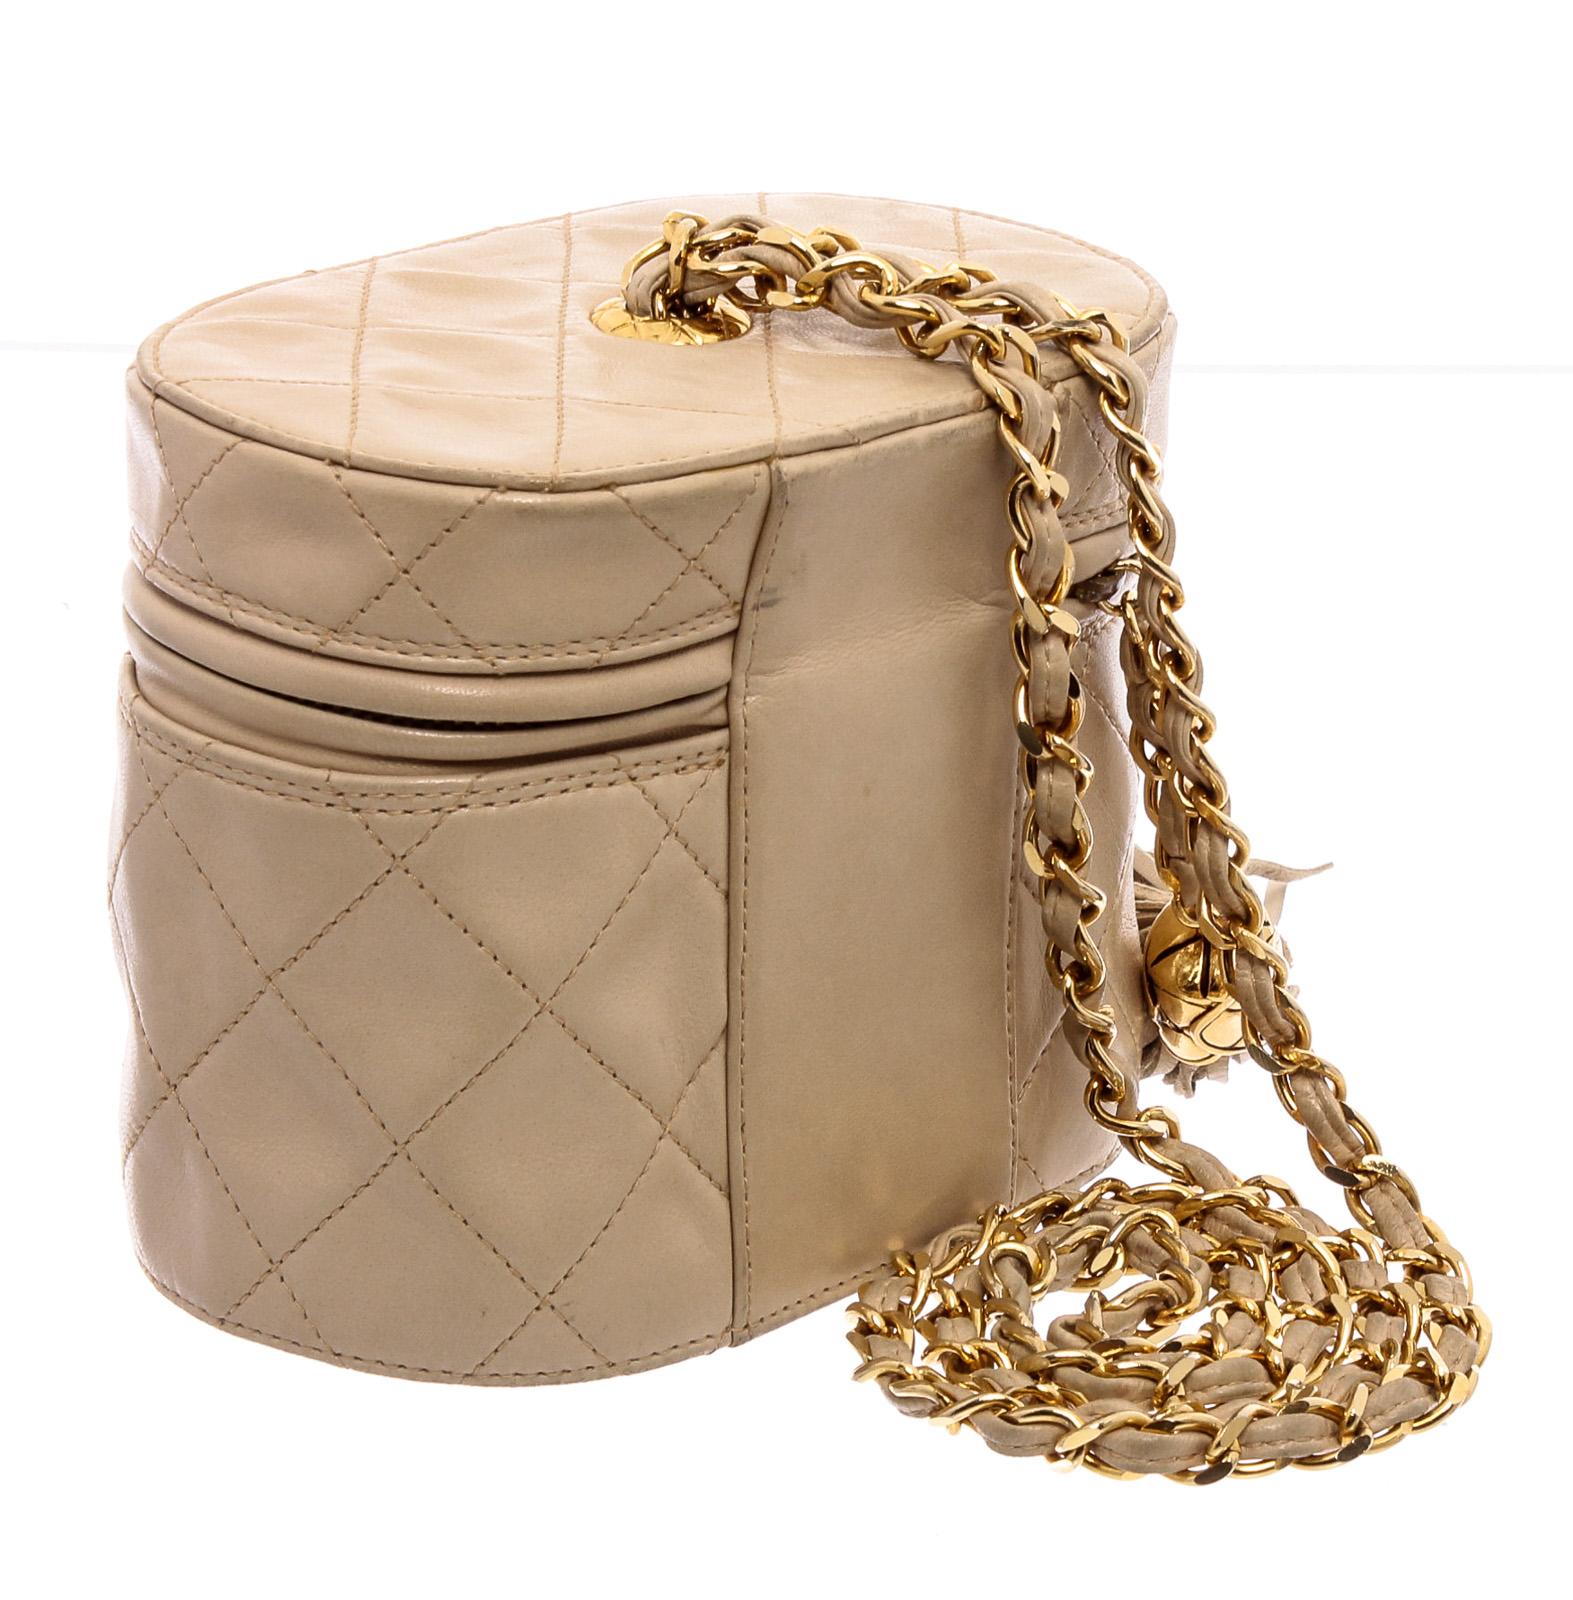 Vintage Chanel mini vanity case featuring quilted beige lambskin leather, gold-tone chain link strap, leather fringe tassel zipper and classic 'CC' logo imprinted at bottom of bag.

21486MSC MLR